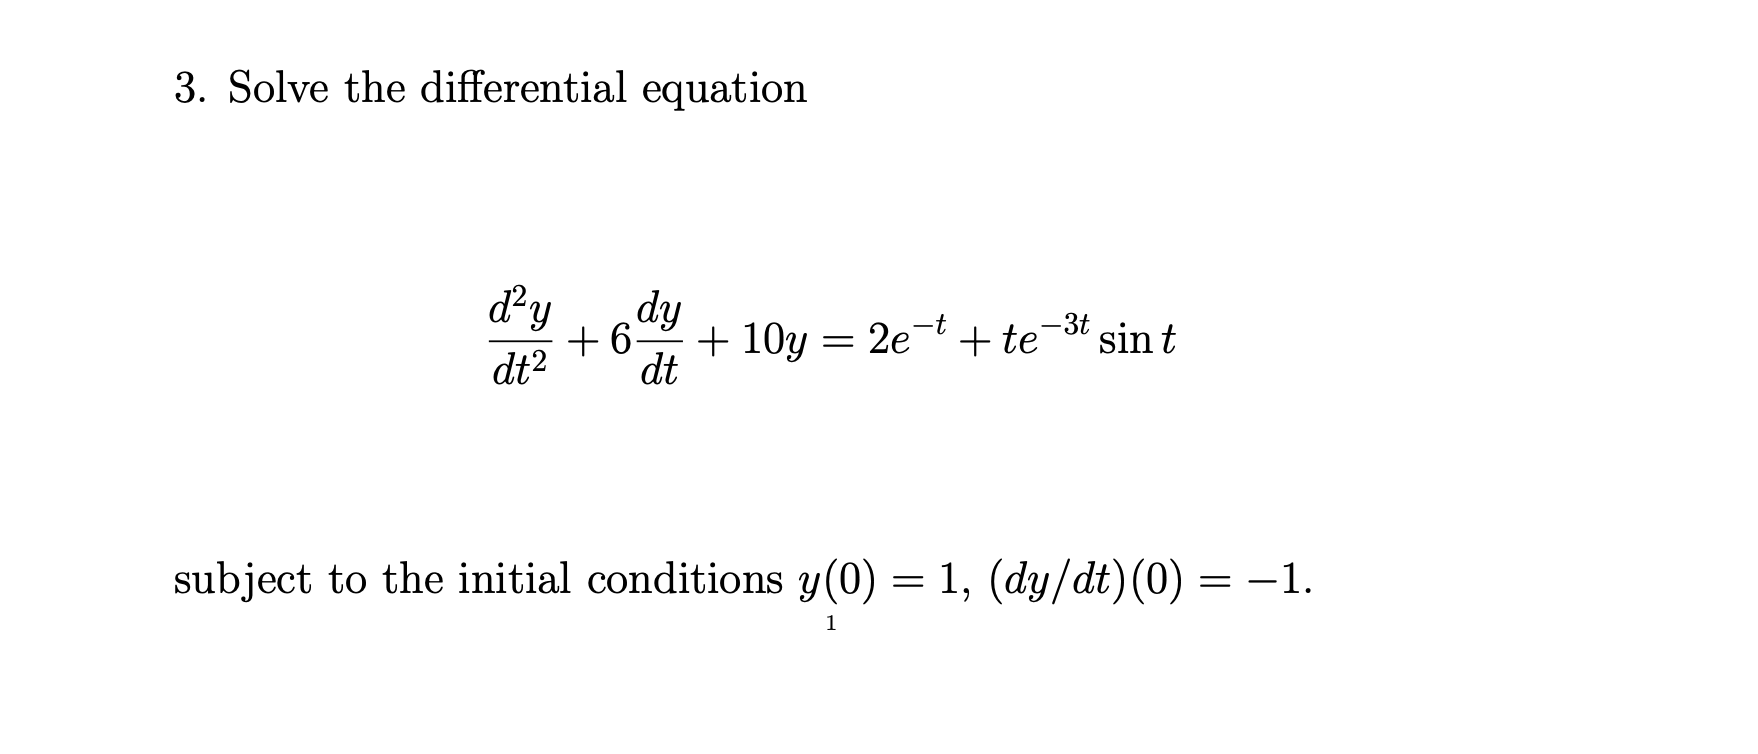 3. Solve the differential equation
d²y
dy
-3t
+6
+ 10y = 2e-t + te
sin t
dt2
dt
subject to the initial conditions y(0) = 1, (dy/dt)(0) = –1.
